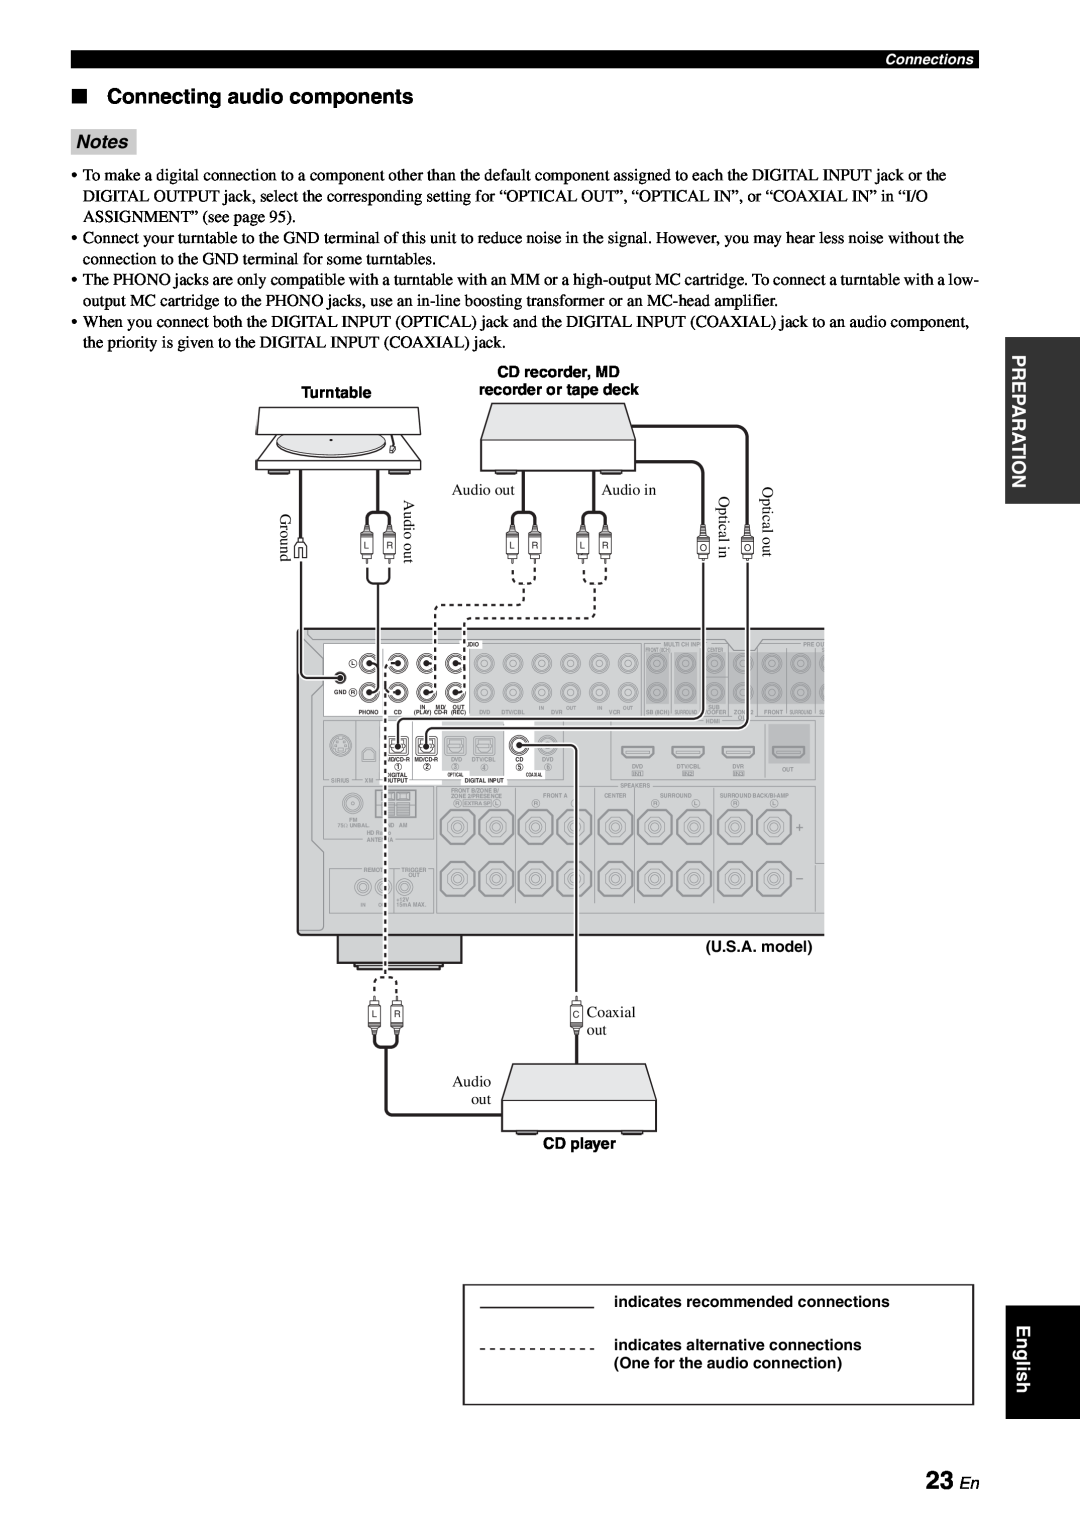 Yamaha RX-V863 owner manual 23 En, Connecting audio components, Notes 